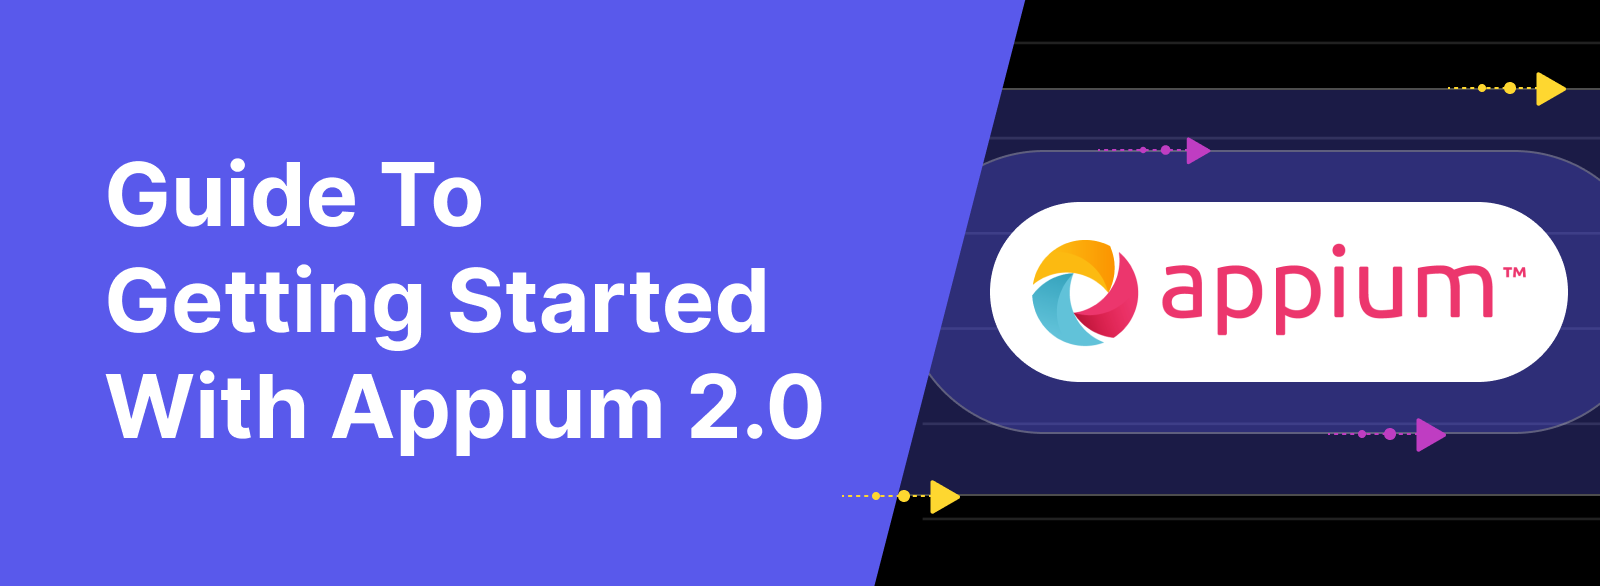 Guide to getting started with Appium 2.0